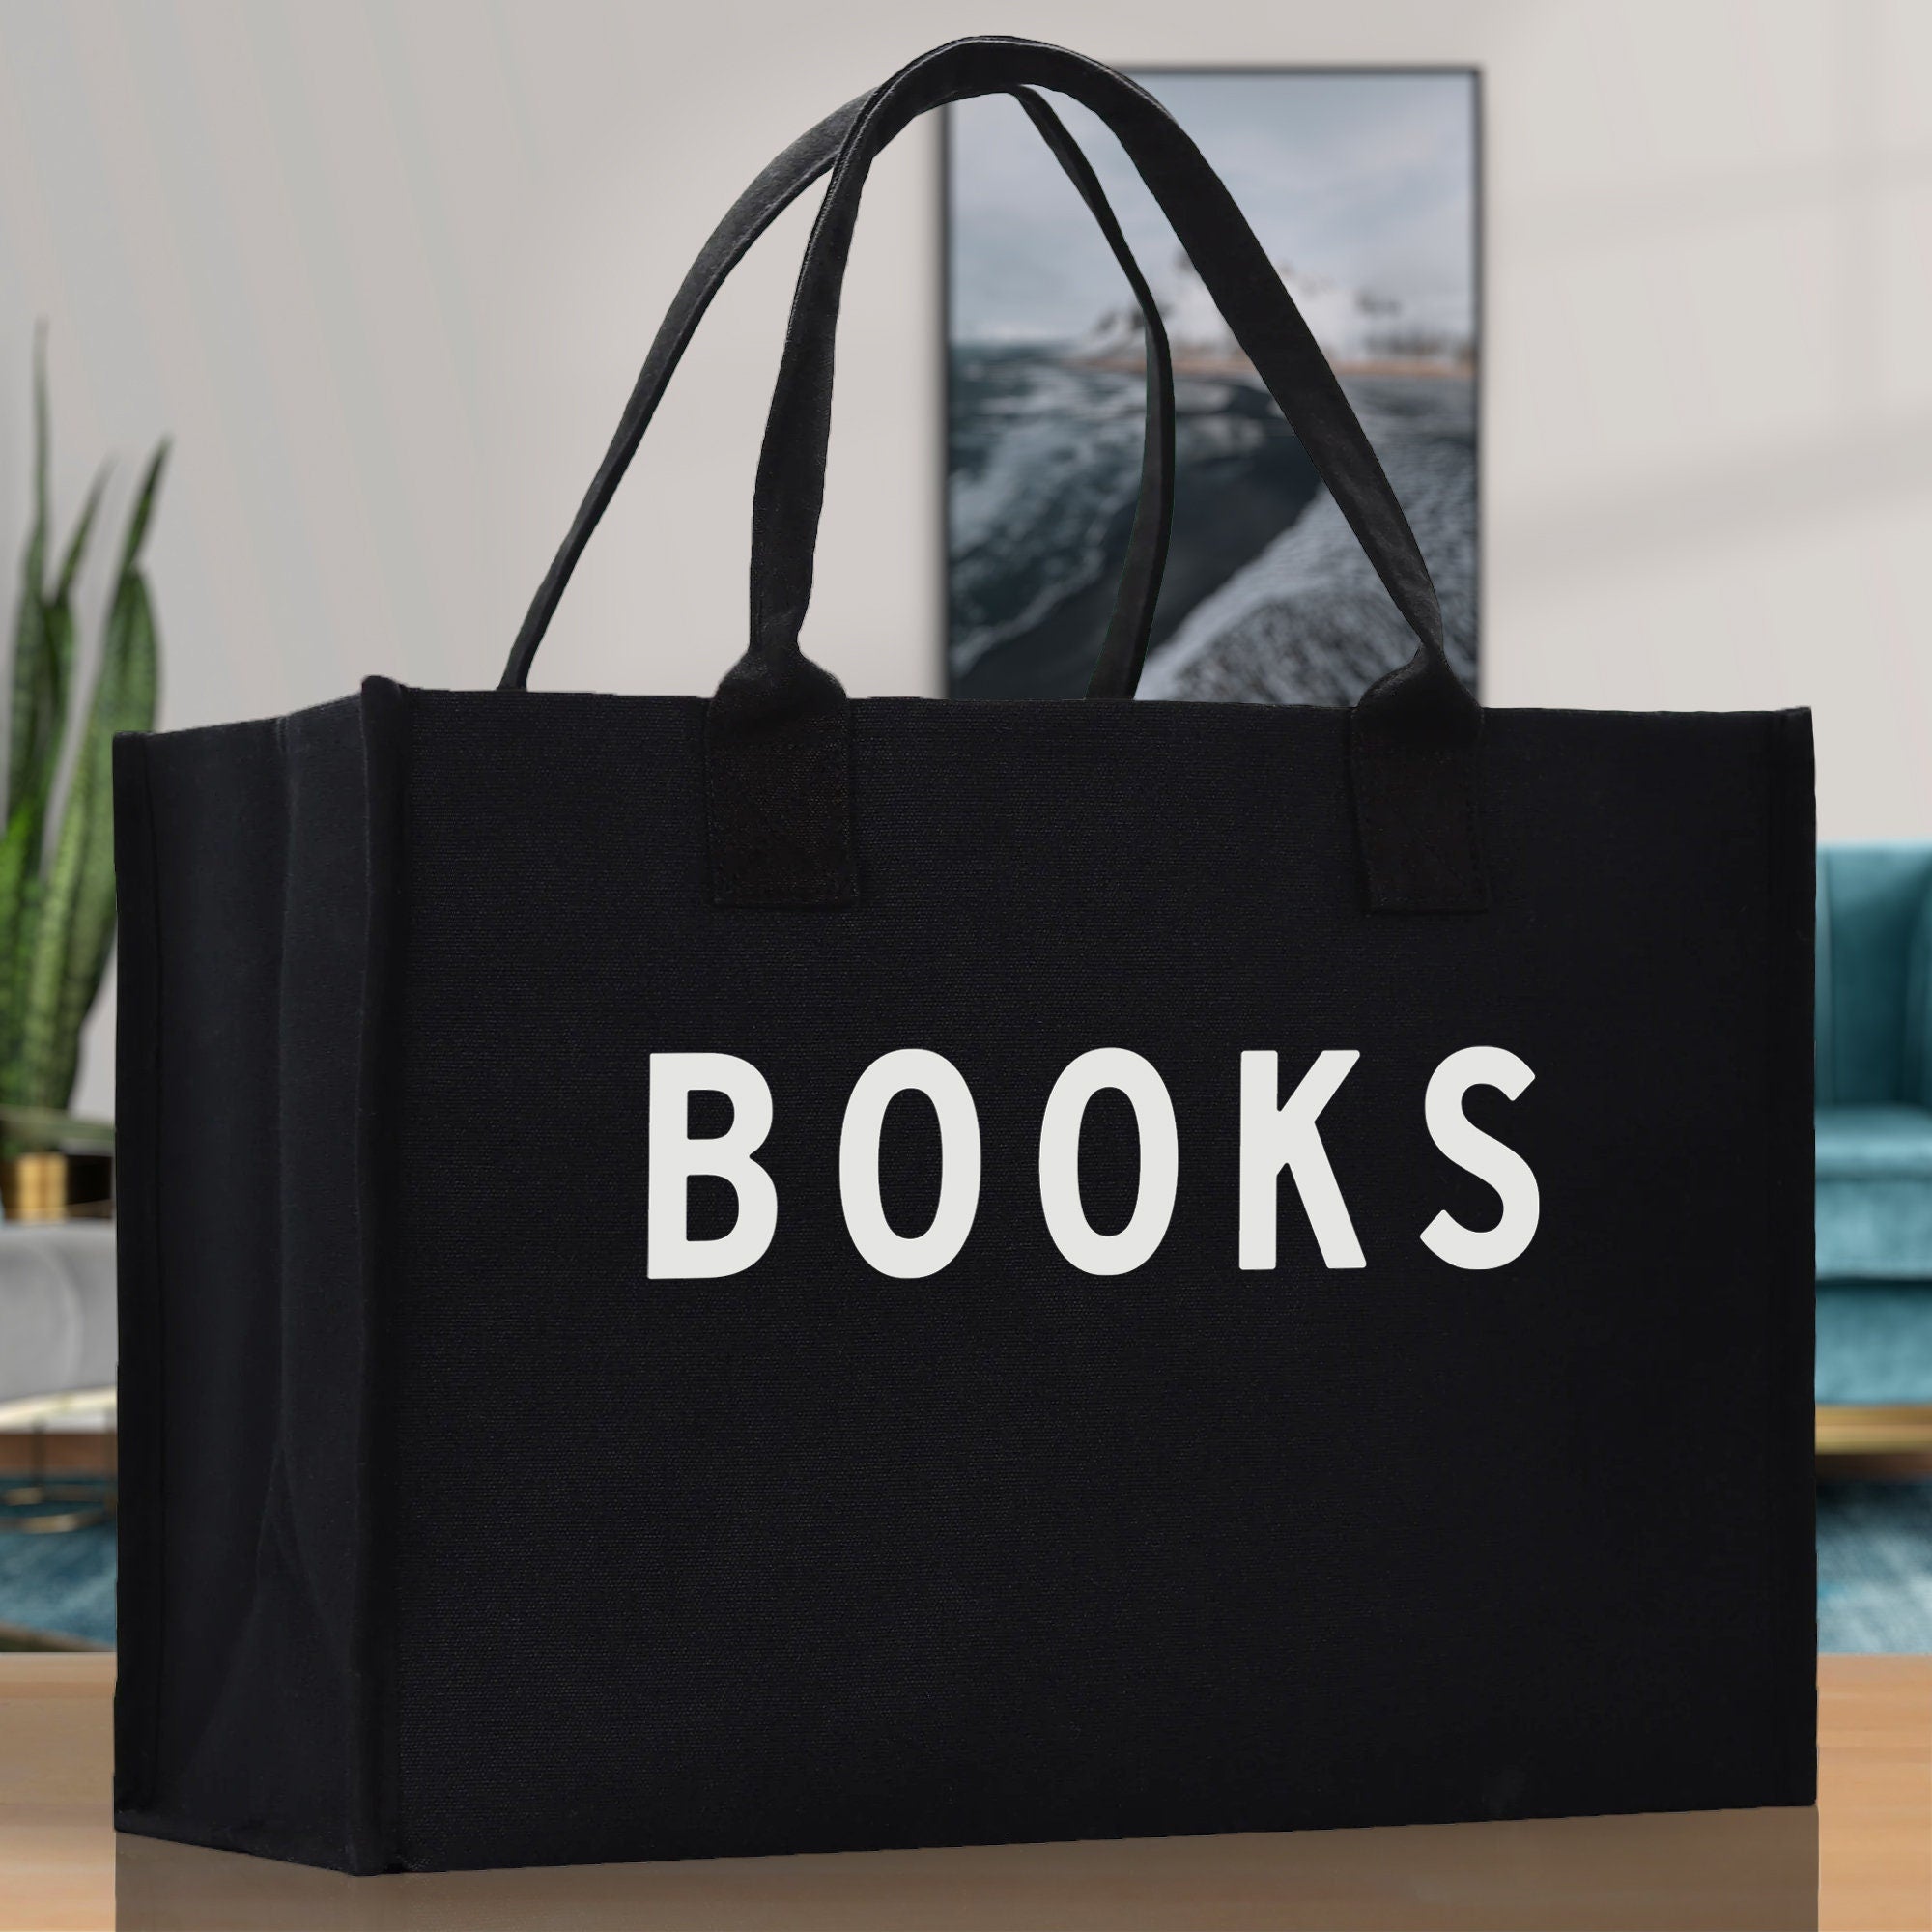 Books Cotton Canvas Chic Beach Tote Bag Multipurpose Tote Weekender Tote Gift for Her Outdoor Tote Vacation Tote Large Beach Bag